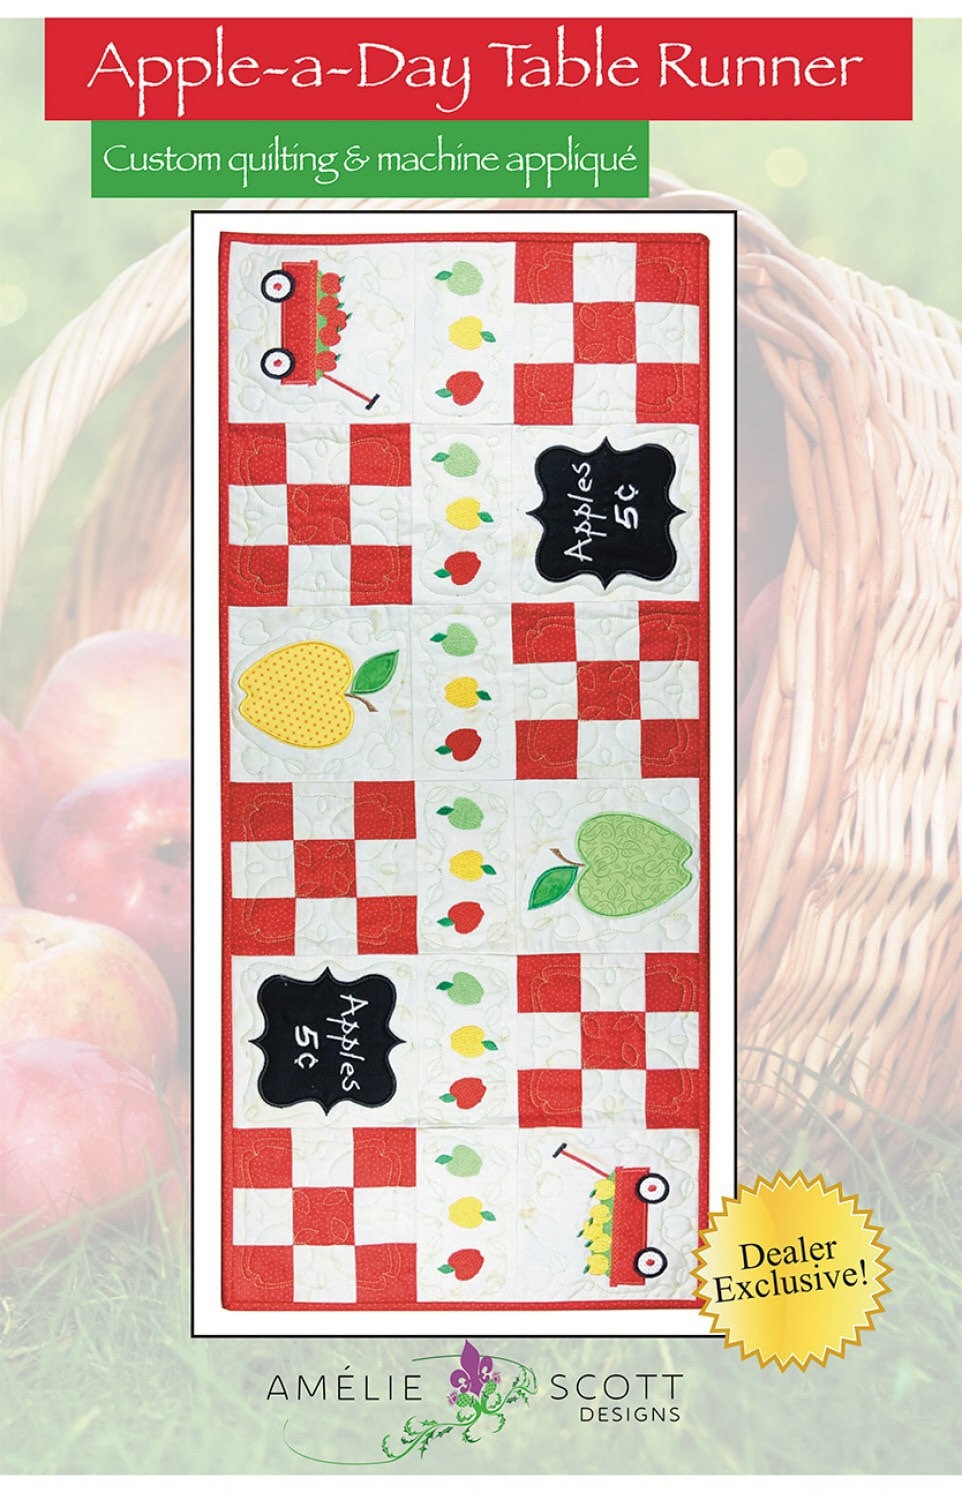 Apple A Day Table Runner Pattern and Embroidery CD - Amelia Scott Designs - Christine Conner - In the Hoop Piecing, Appliquéing & Quilting